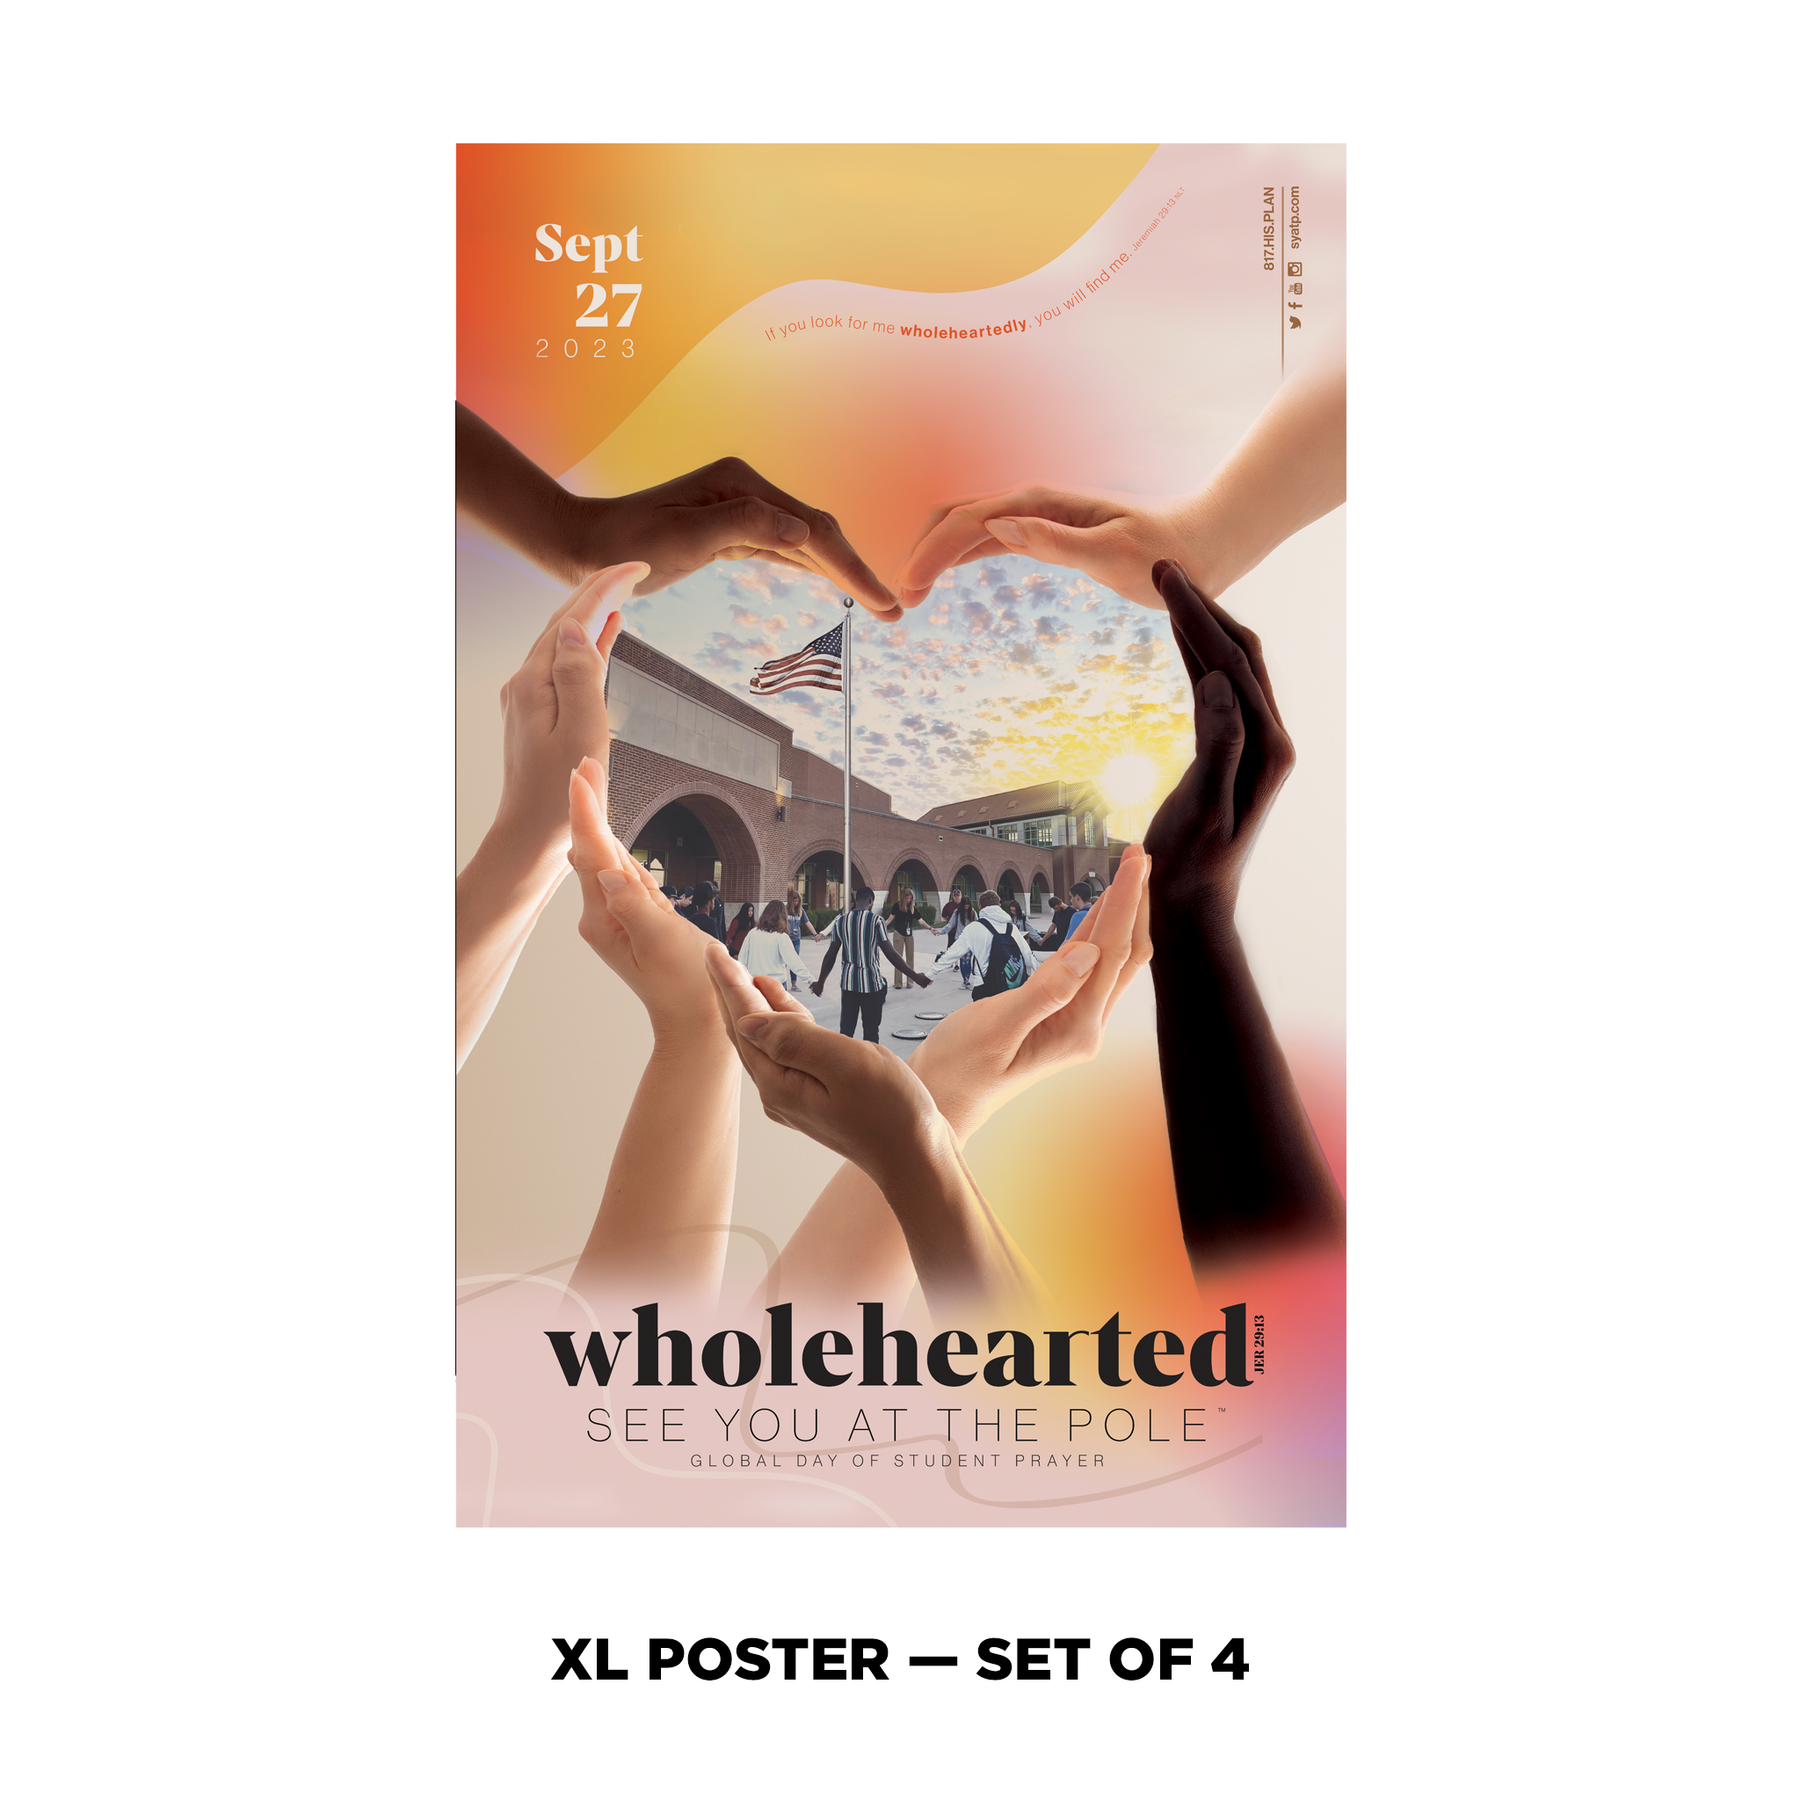 Extra-Large Poster (set of 4)